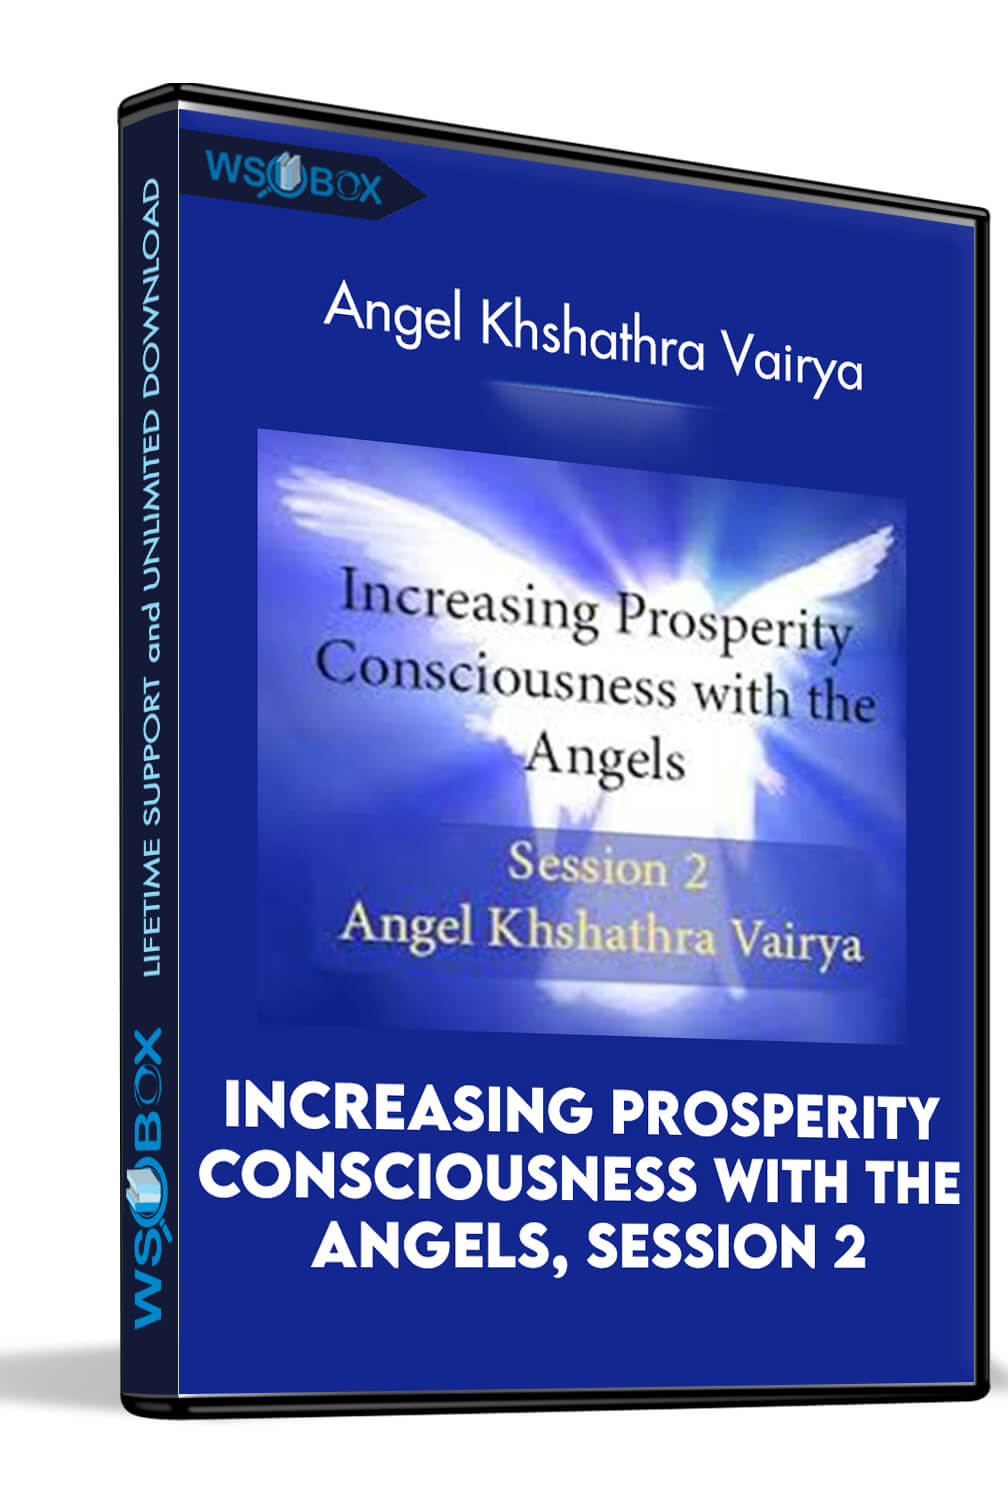 Increasing Prosperity Consciousness with the Angels, Session 2